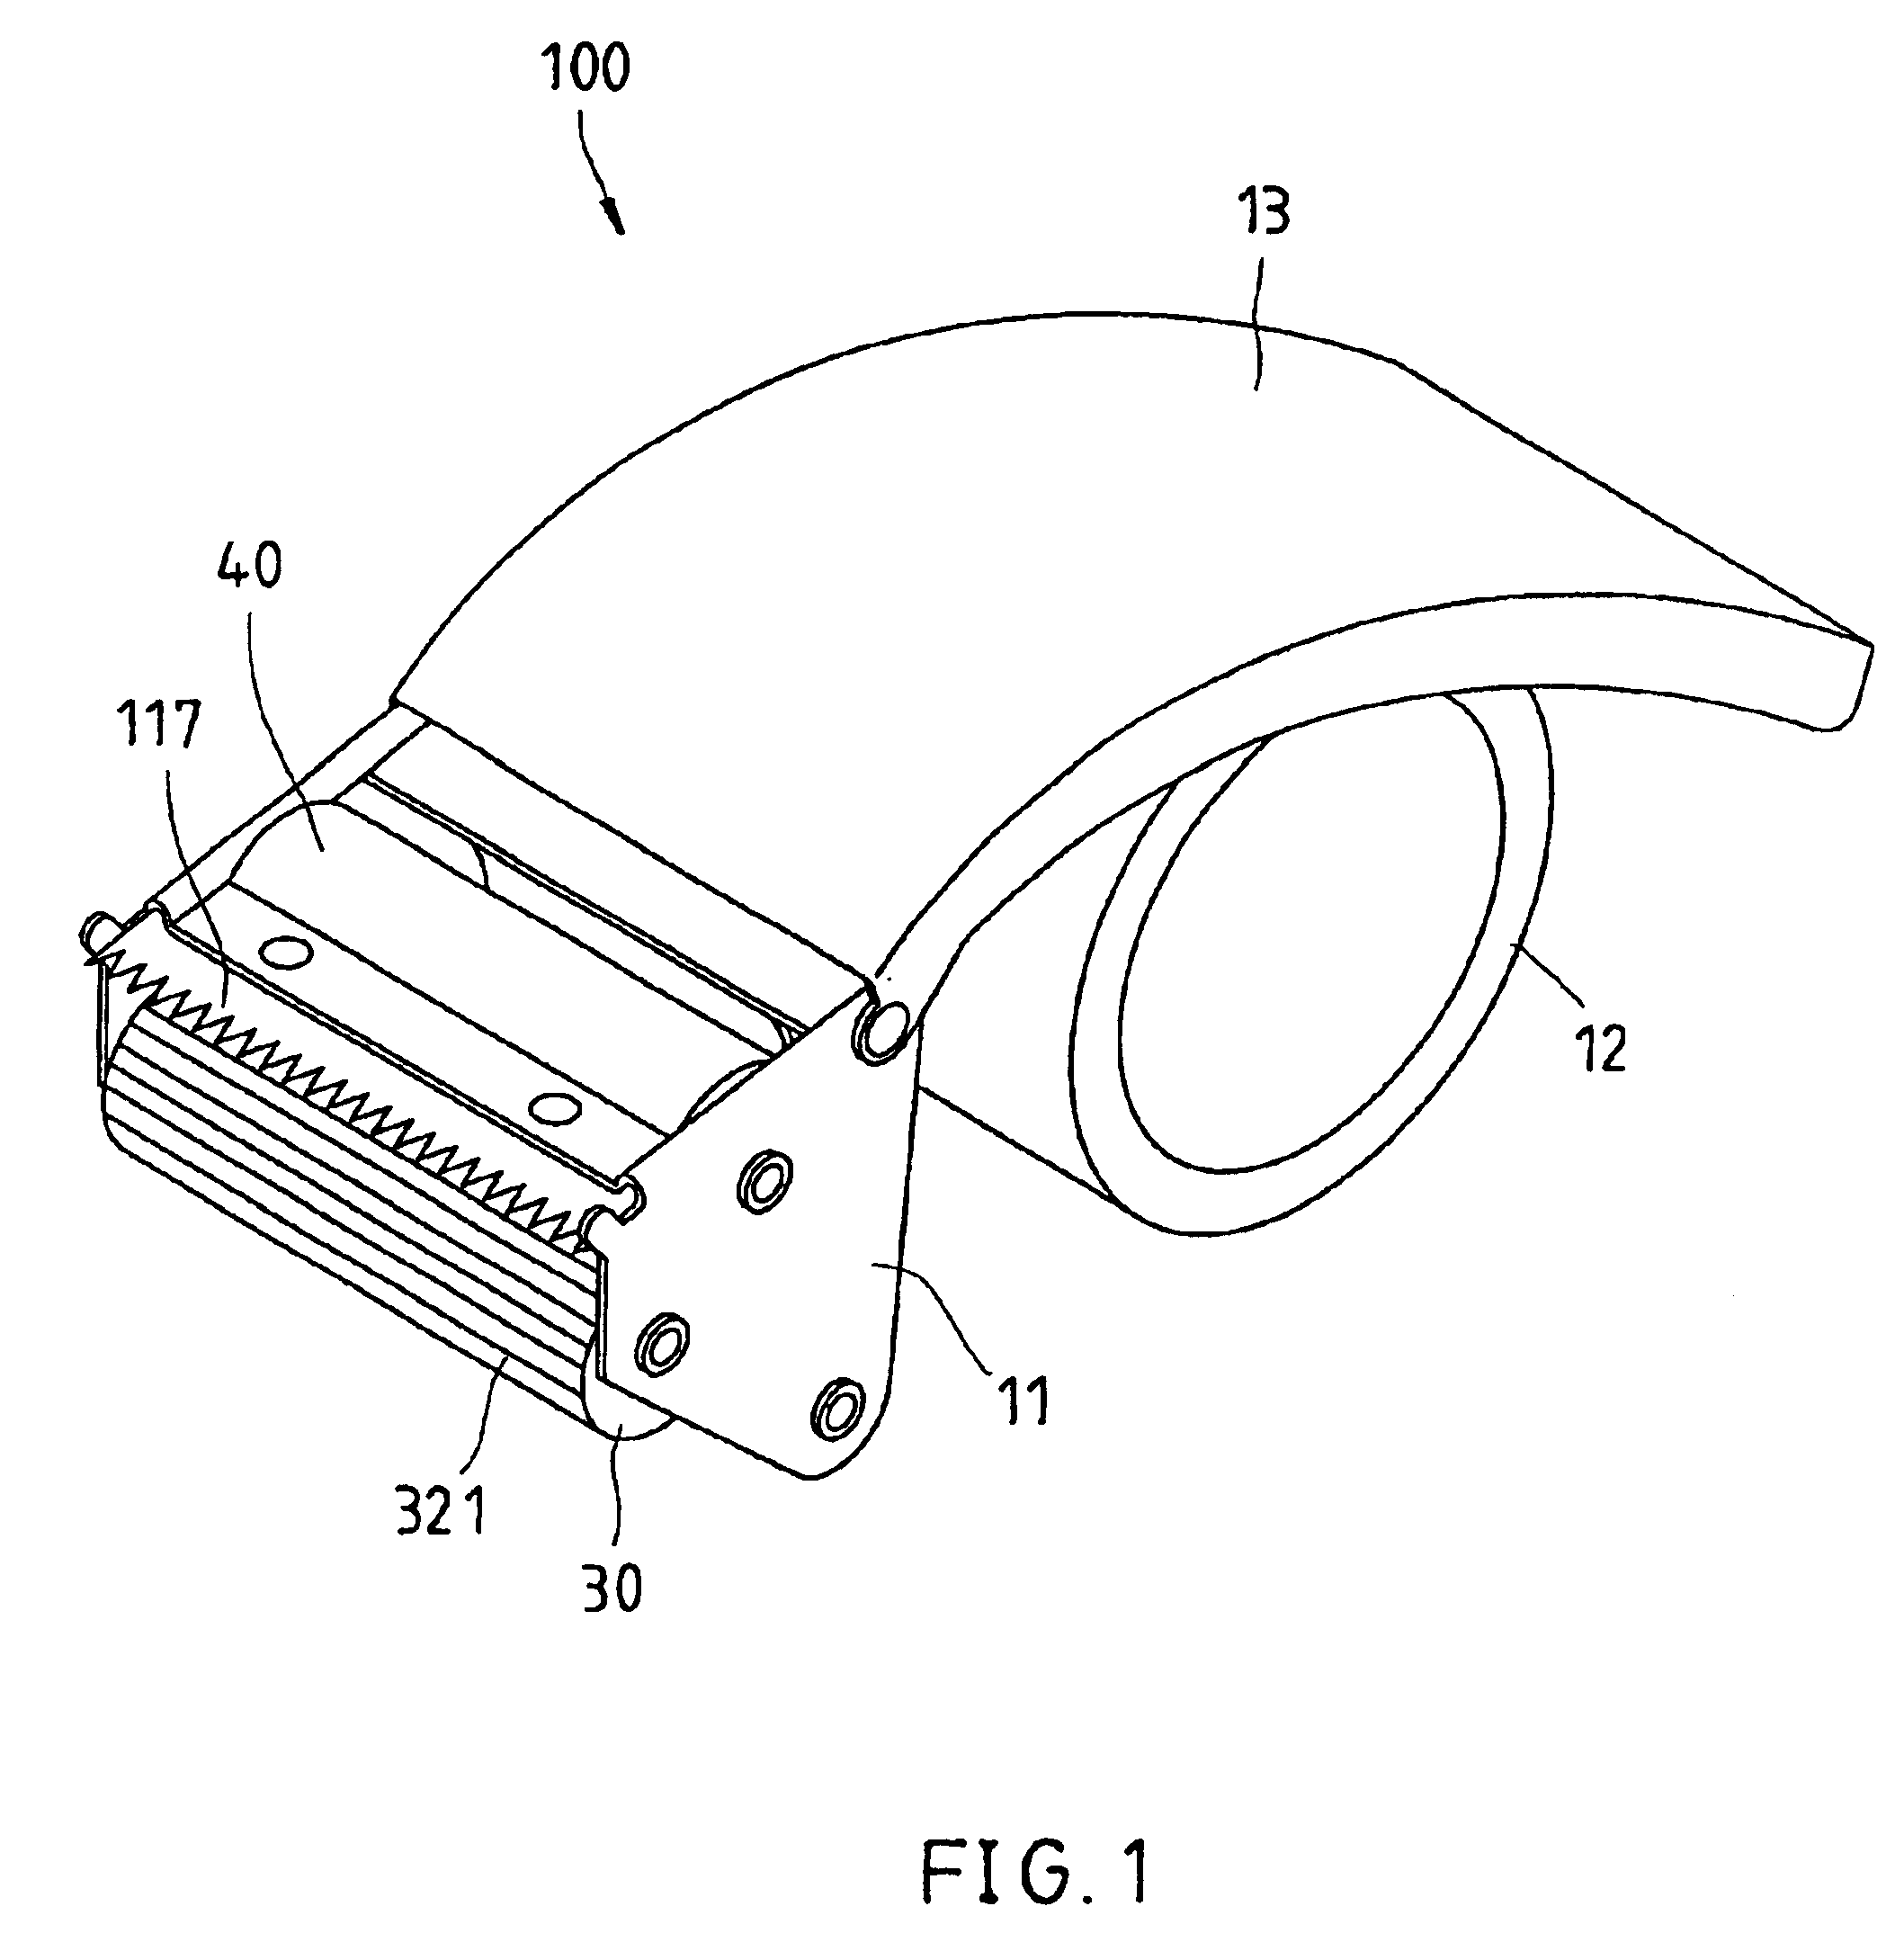 Double-sided adhesive tape dispenser